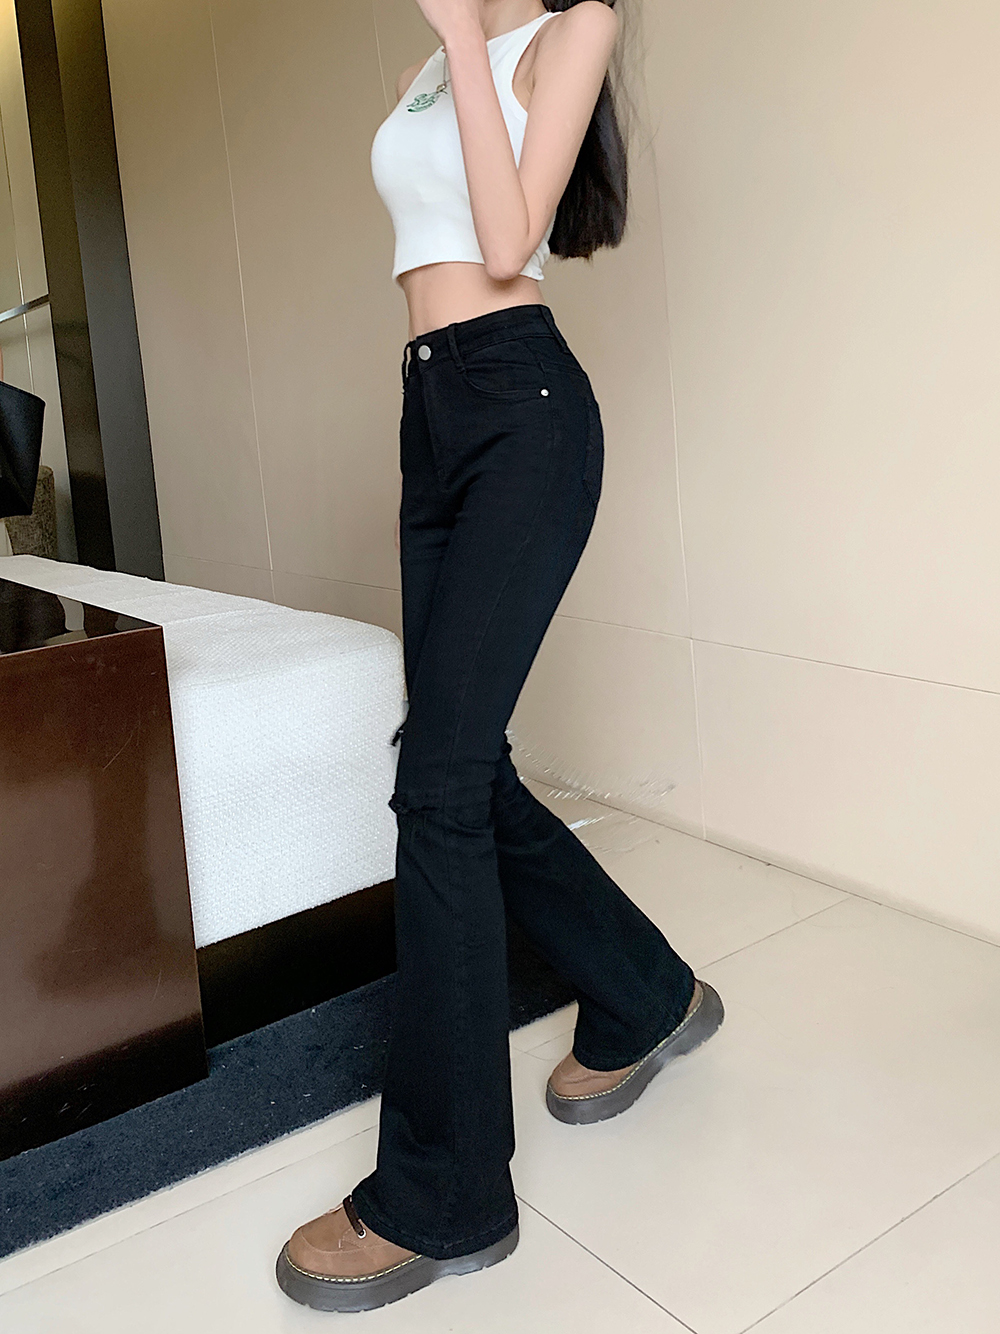 Elasticity high waist spring and autumn jeans for women